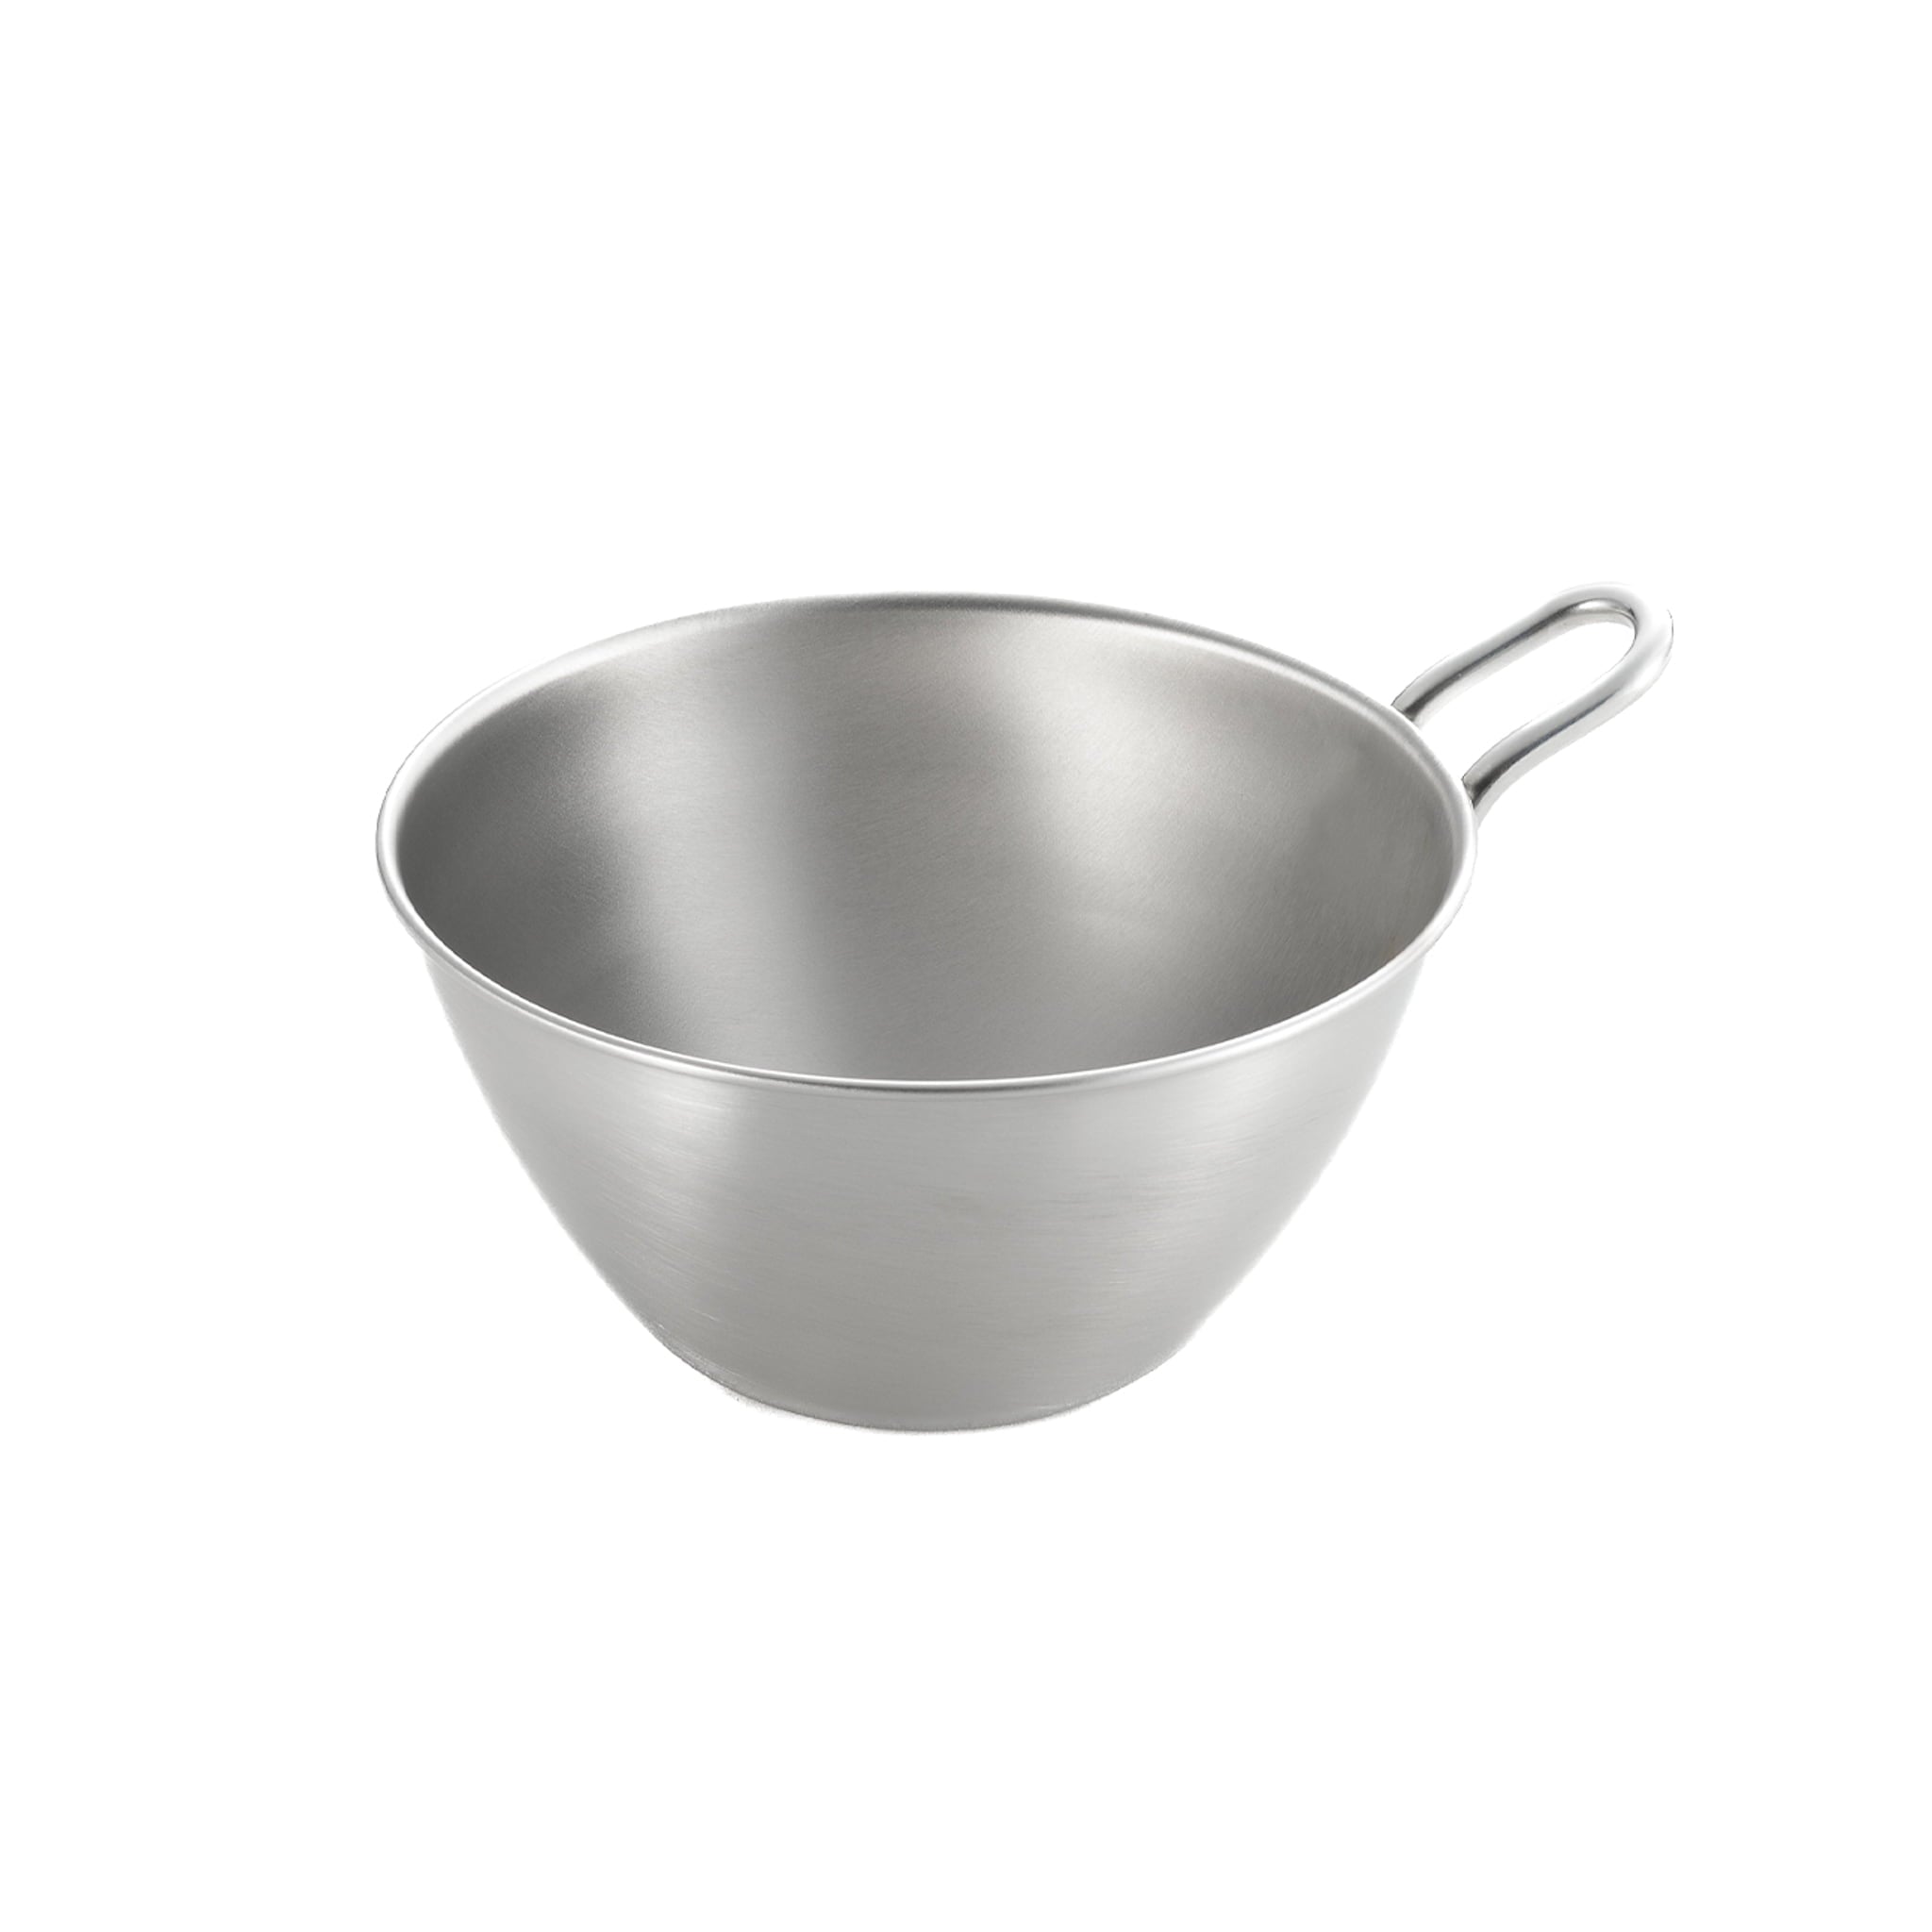 Japanese Stainless Steel Prep Bowl with Handle, 500ml